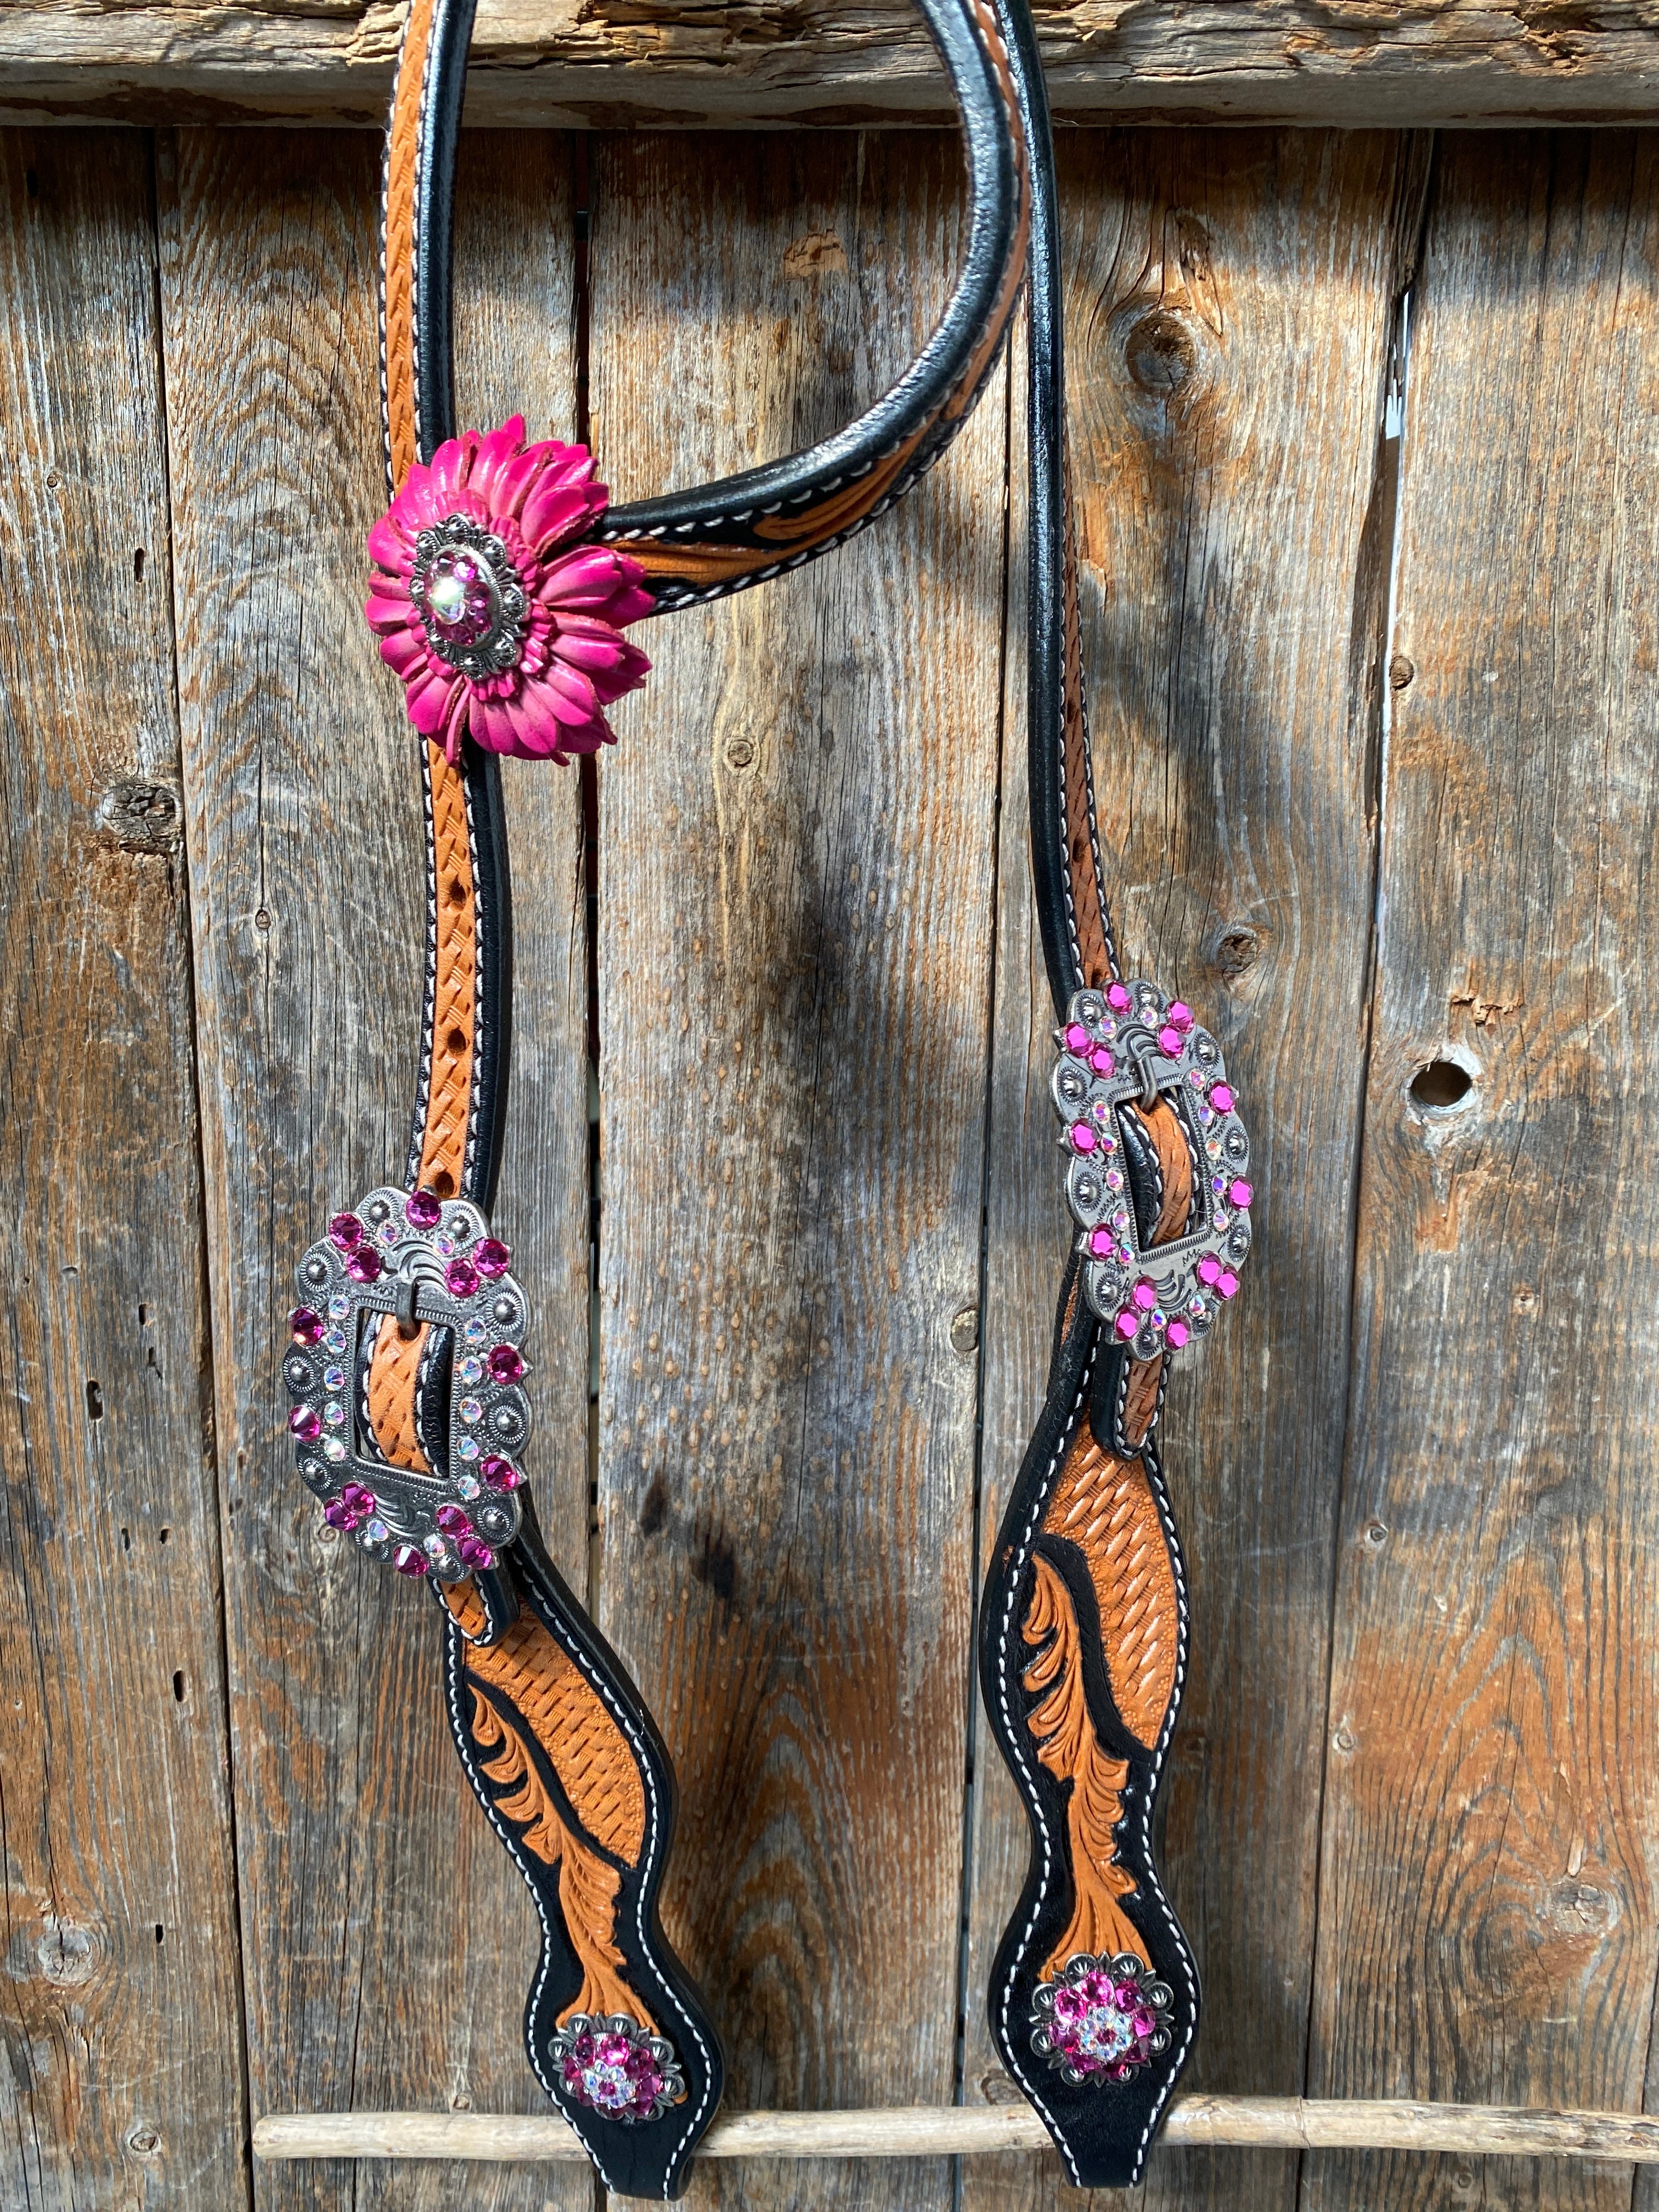 Leaf Scalloped Two Tone Pink Daisy One Ear Headstall / Bridle & Breastcollar Set #OEBC410 - RODEO DRIVE